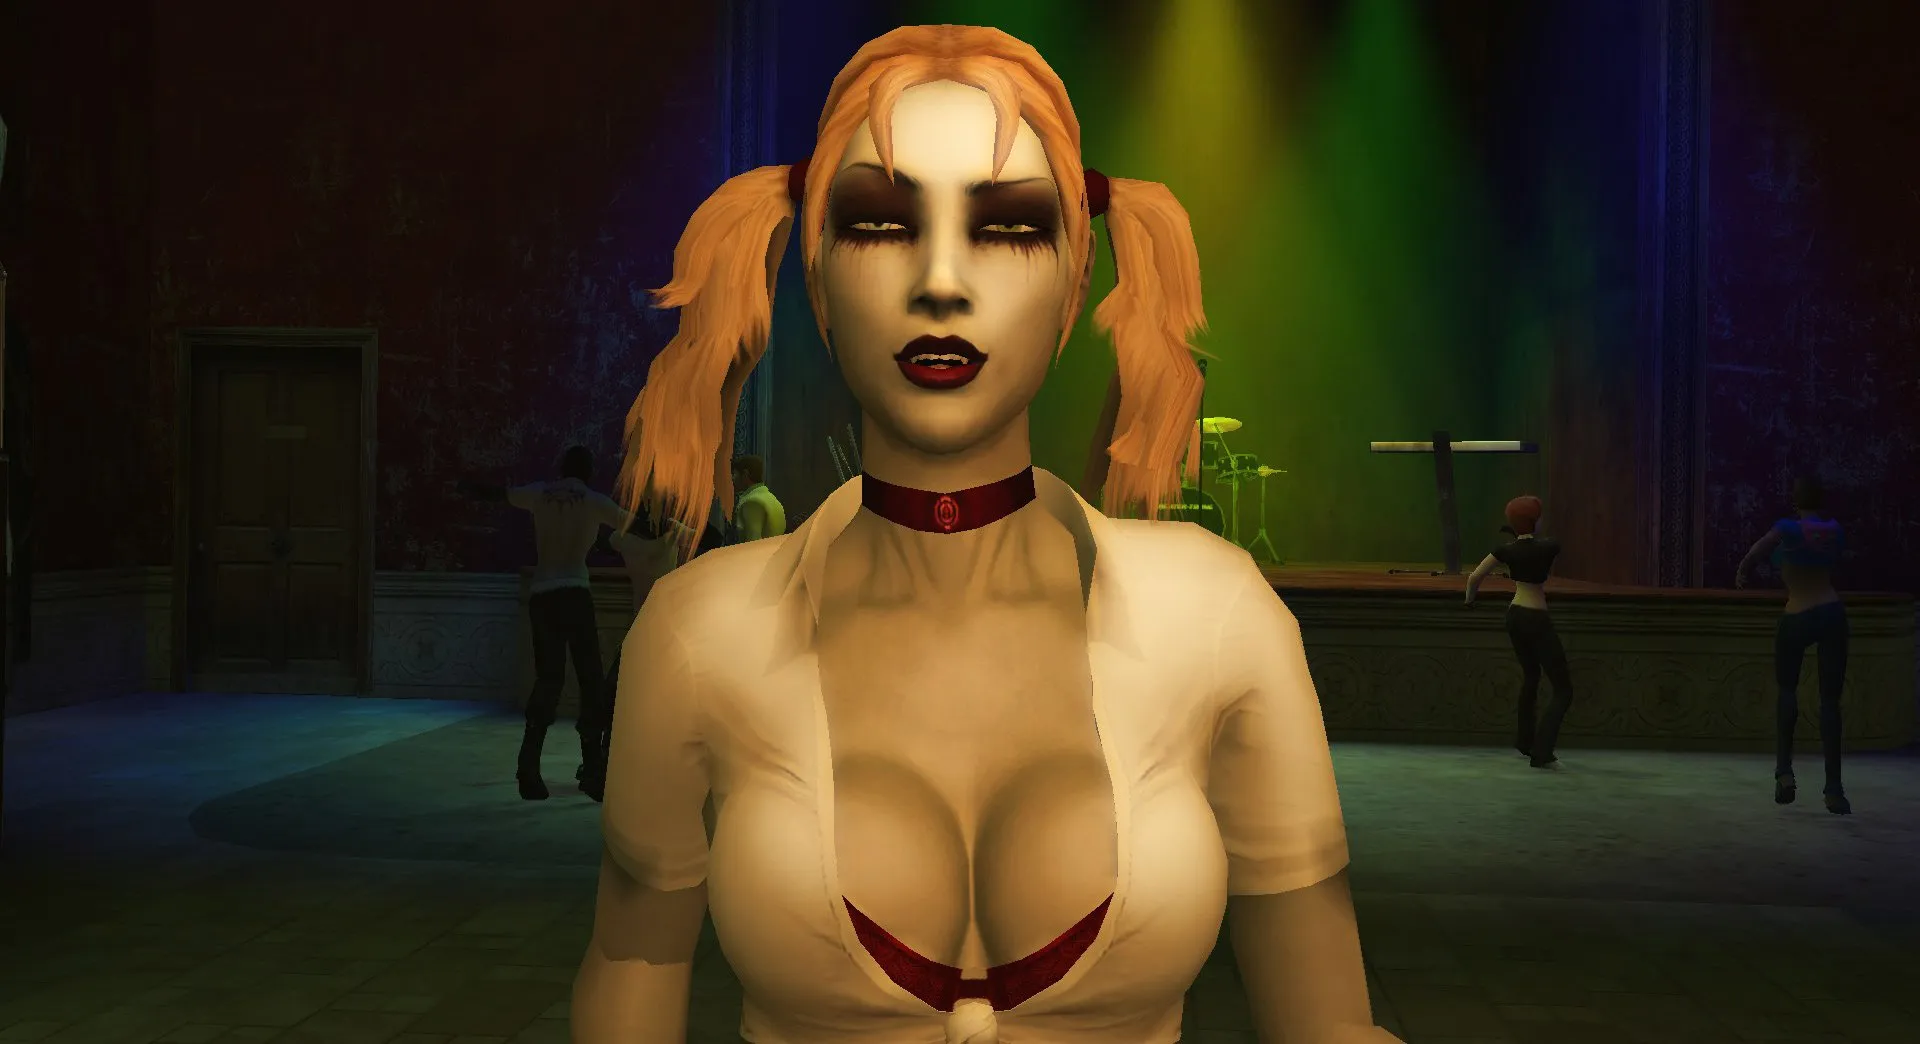 Top 7 Vampire: The Masquerade - Bloodlines mods on PC